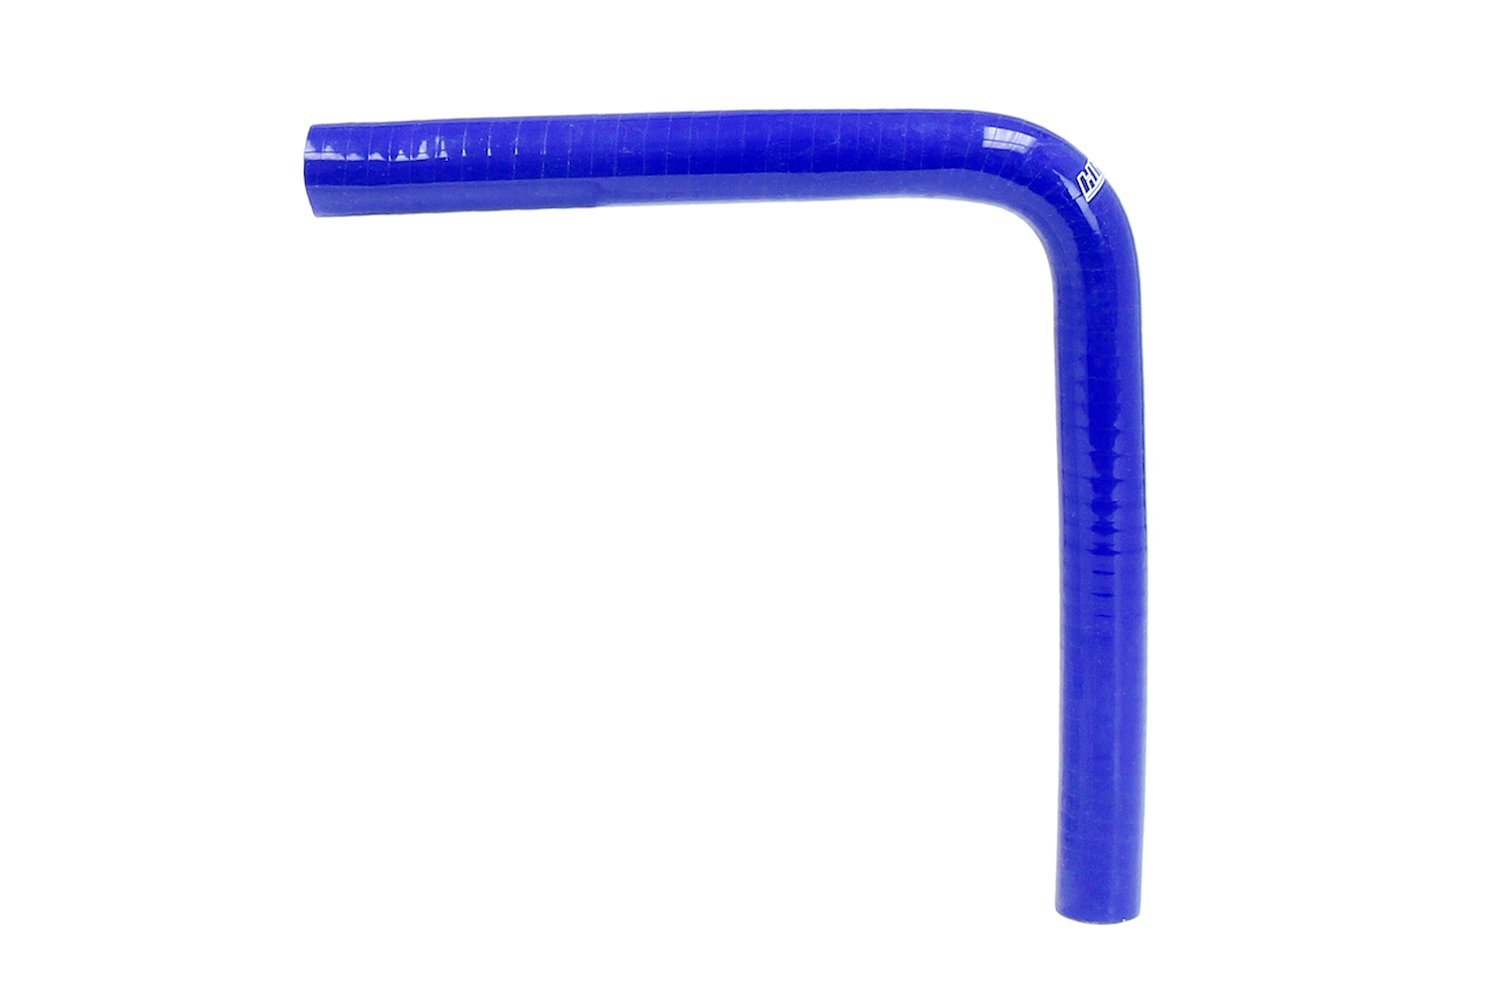 HTSEC90-062-BLUE Silicone 90-Degree Elbow Coupler Hose, High-Temp 4-Ply Reinforced, 5/8 in. ID, Blue